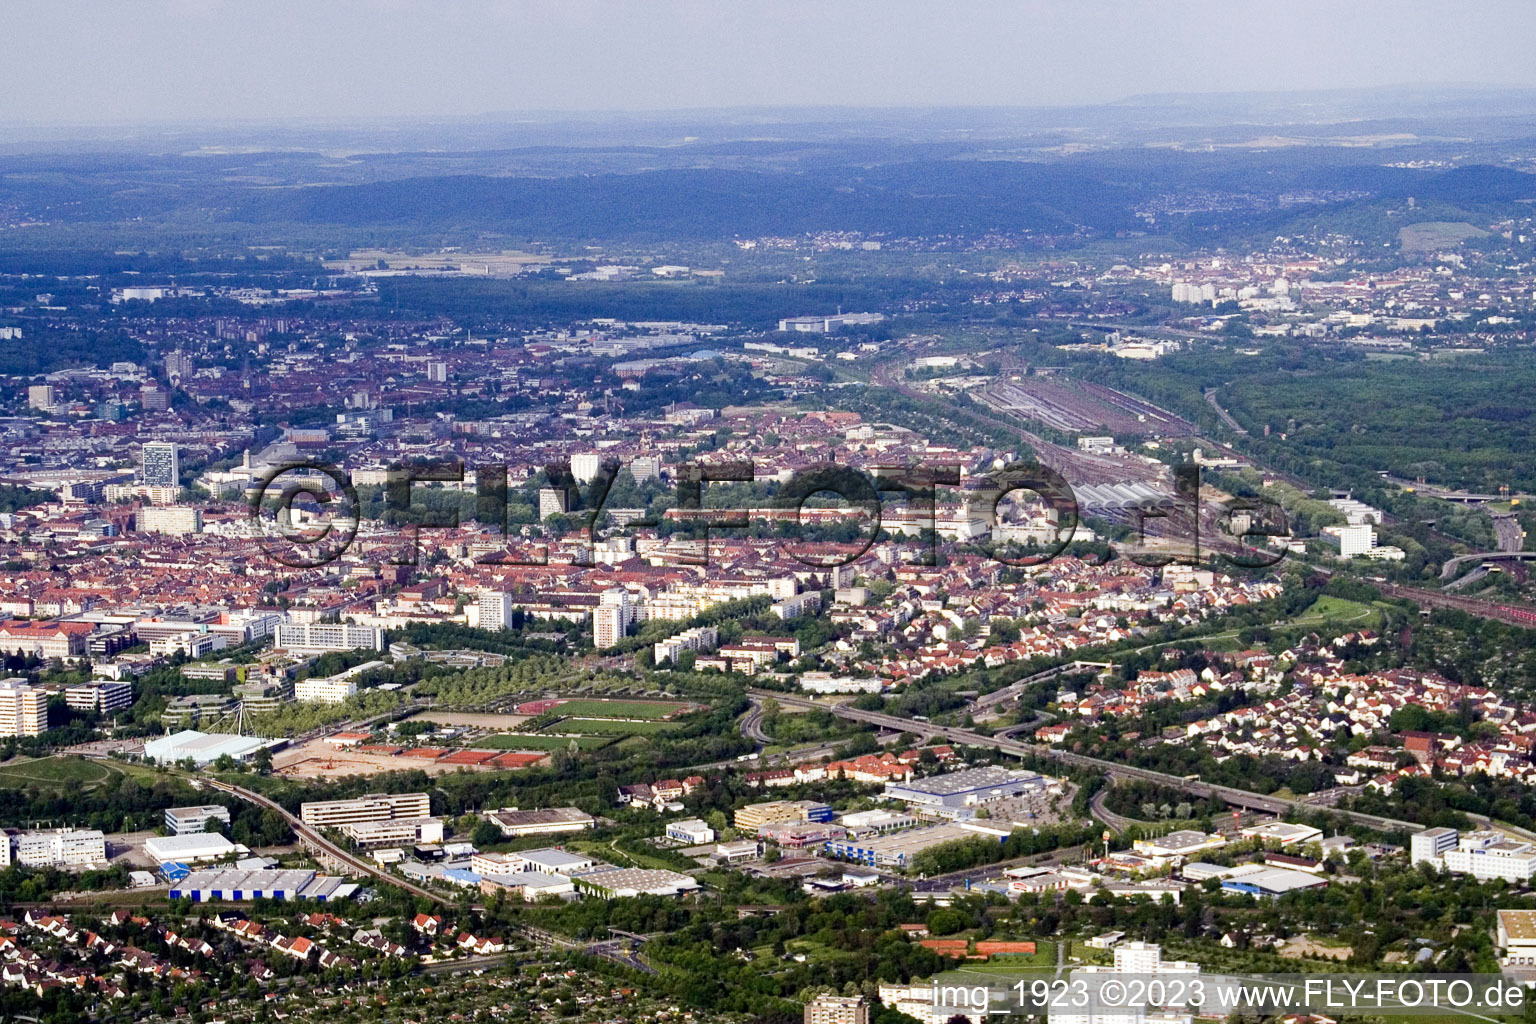 District Beiertheim-Bulach in Karlsruhe in the state Baden-Wuerttemberg, Germany from above